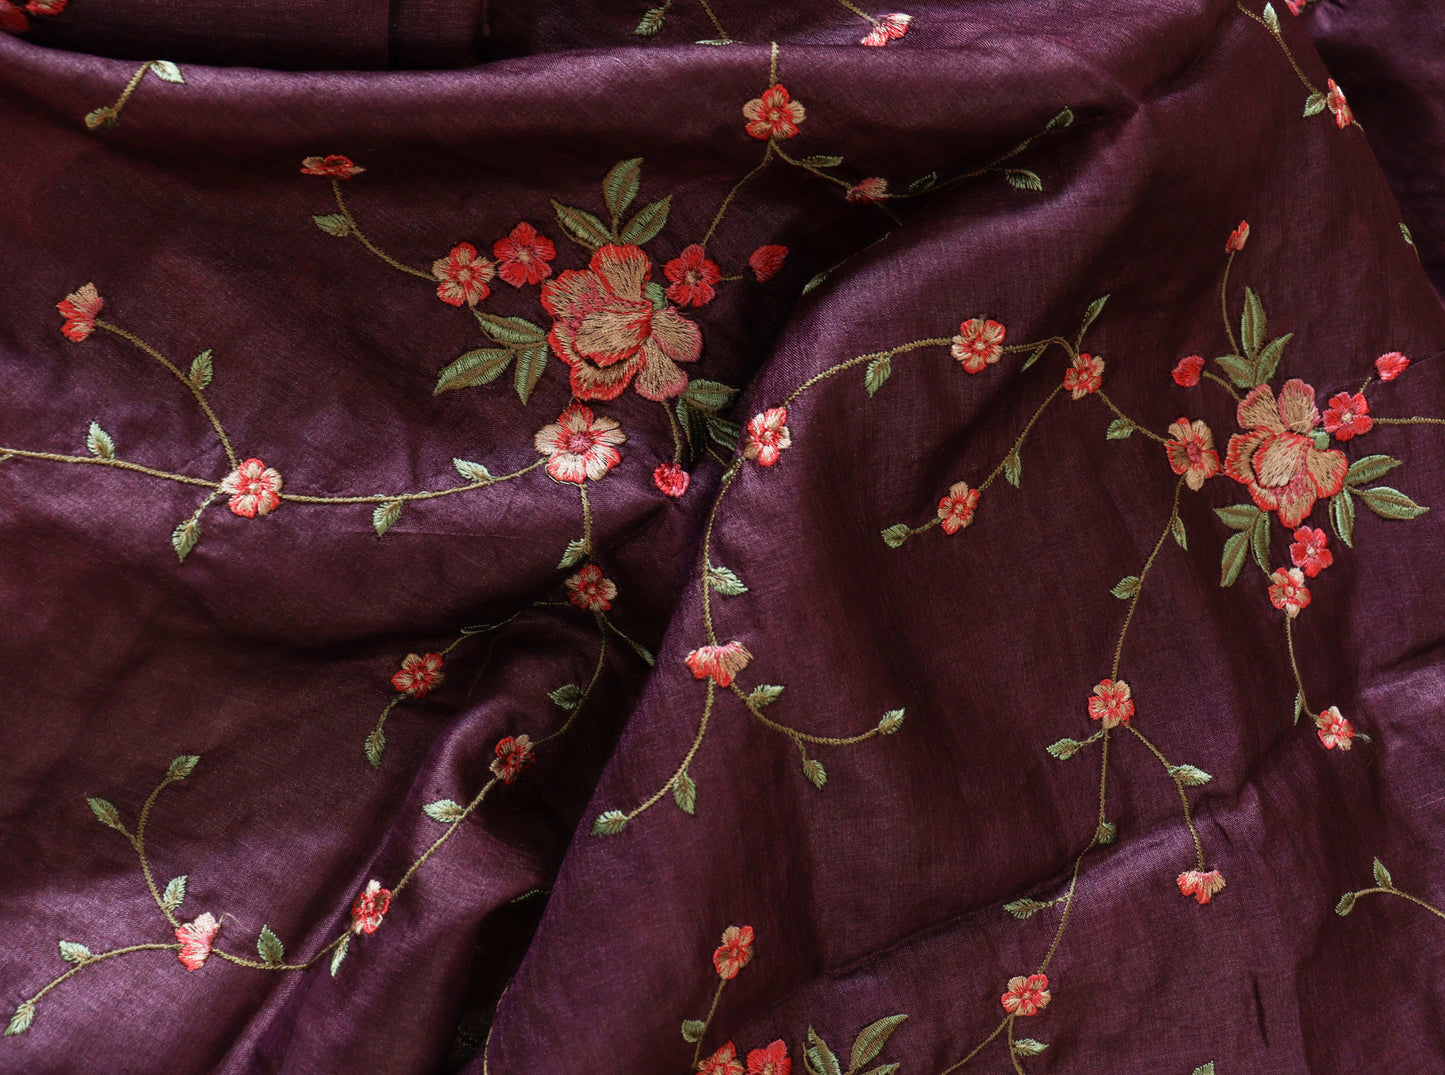 Wine Floral Embroidered Moonga